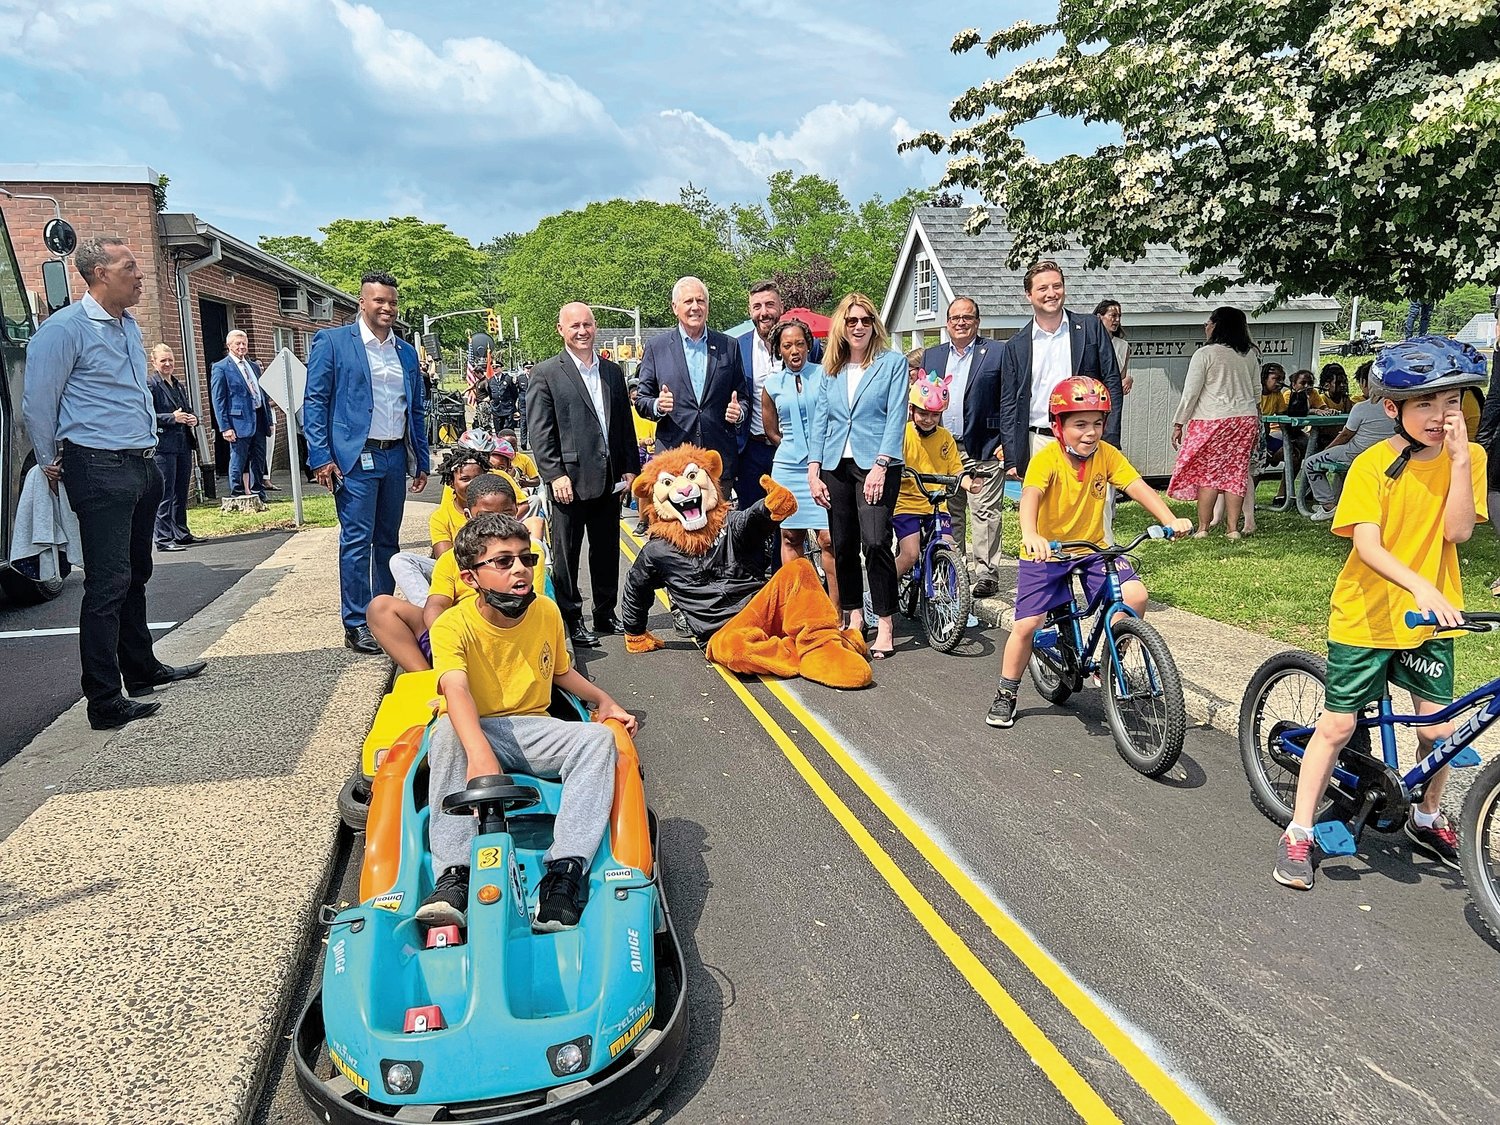 FirstNet, Built by AT&T, donated $110,000 to the Nassau County Police Department’s Safety Town, helping provide the 50-year-old East Meadow facility with a much-needed upgrade to help teach children traffic safety for years to come.